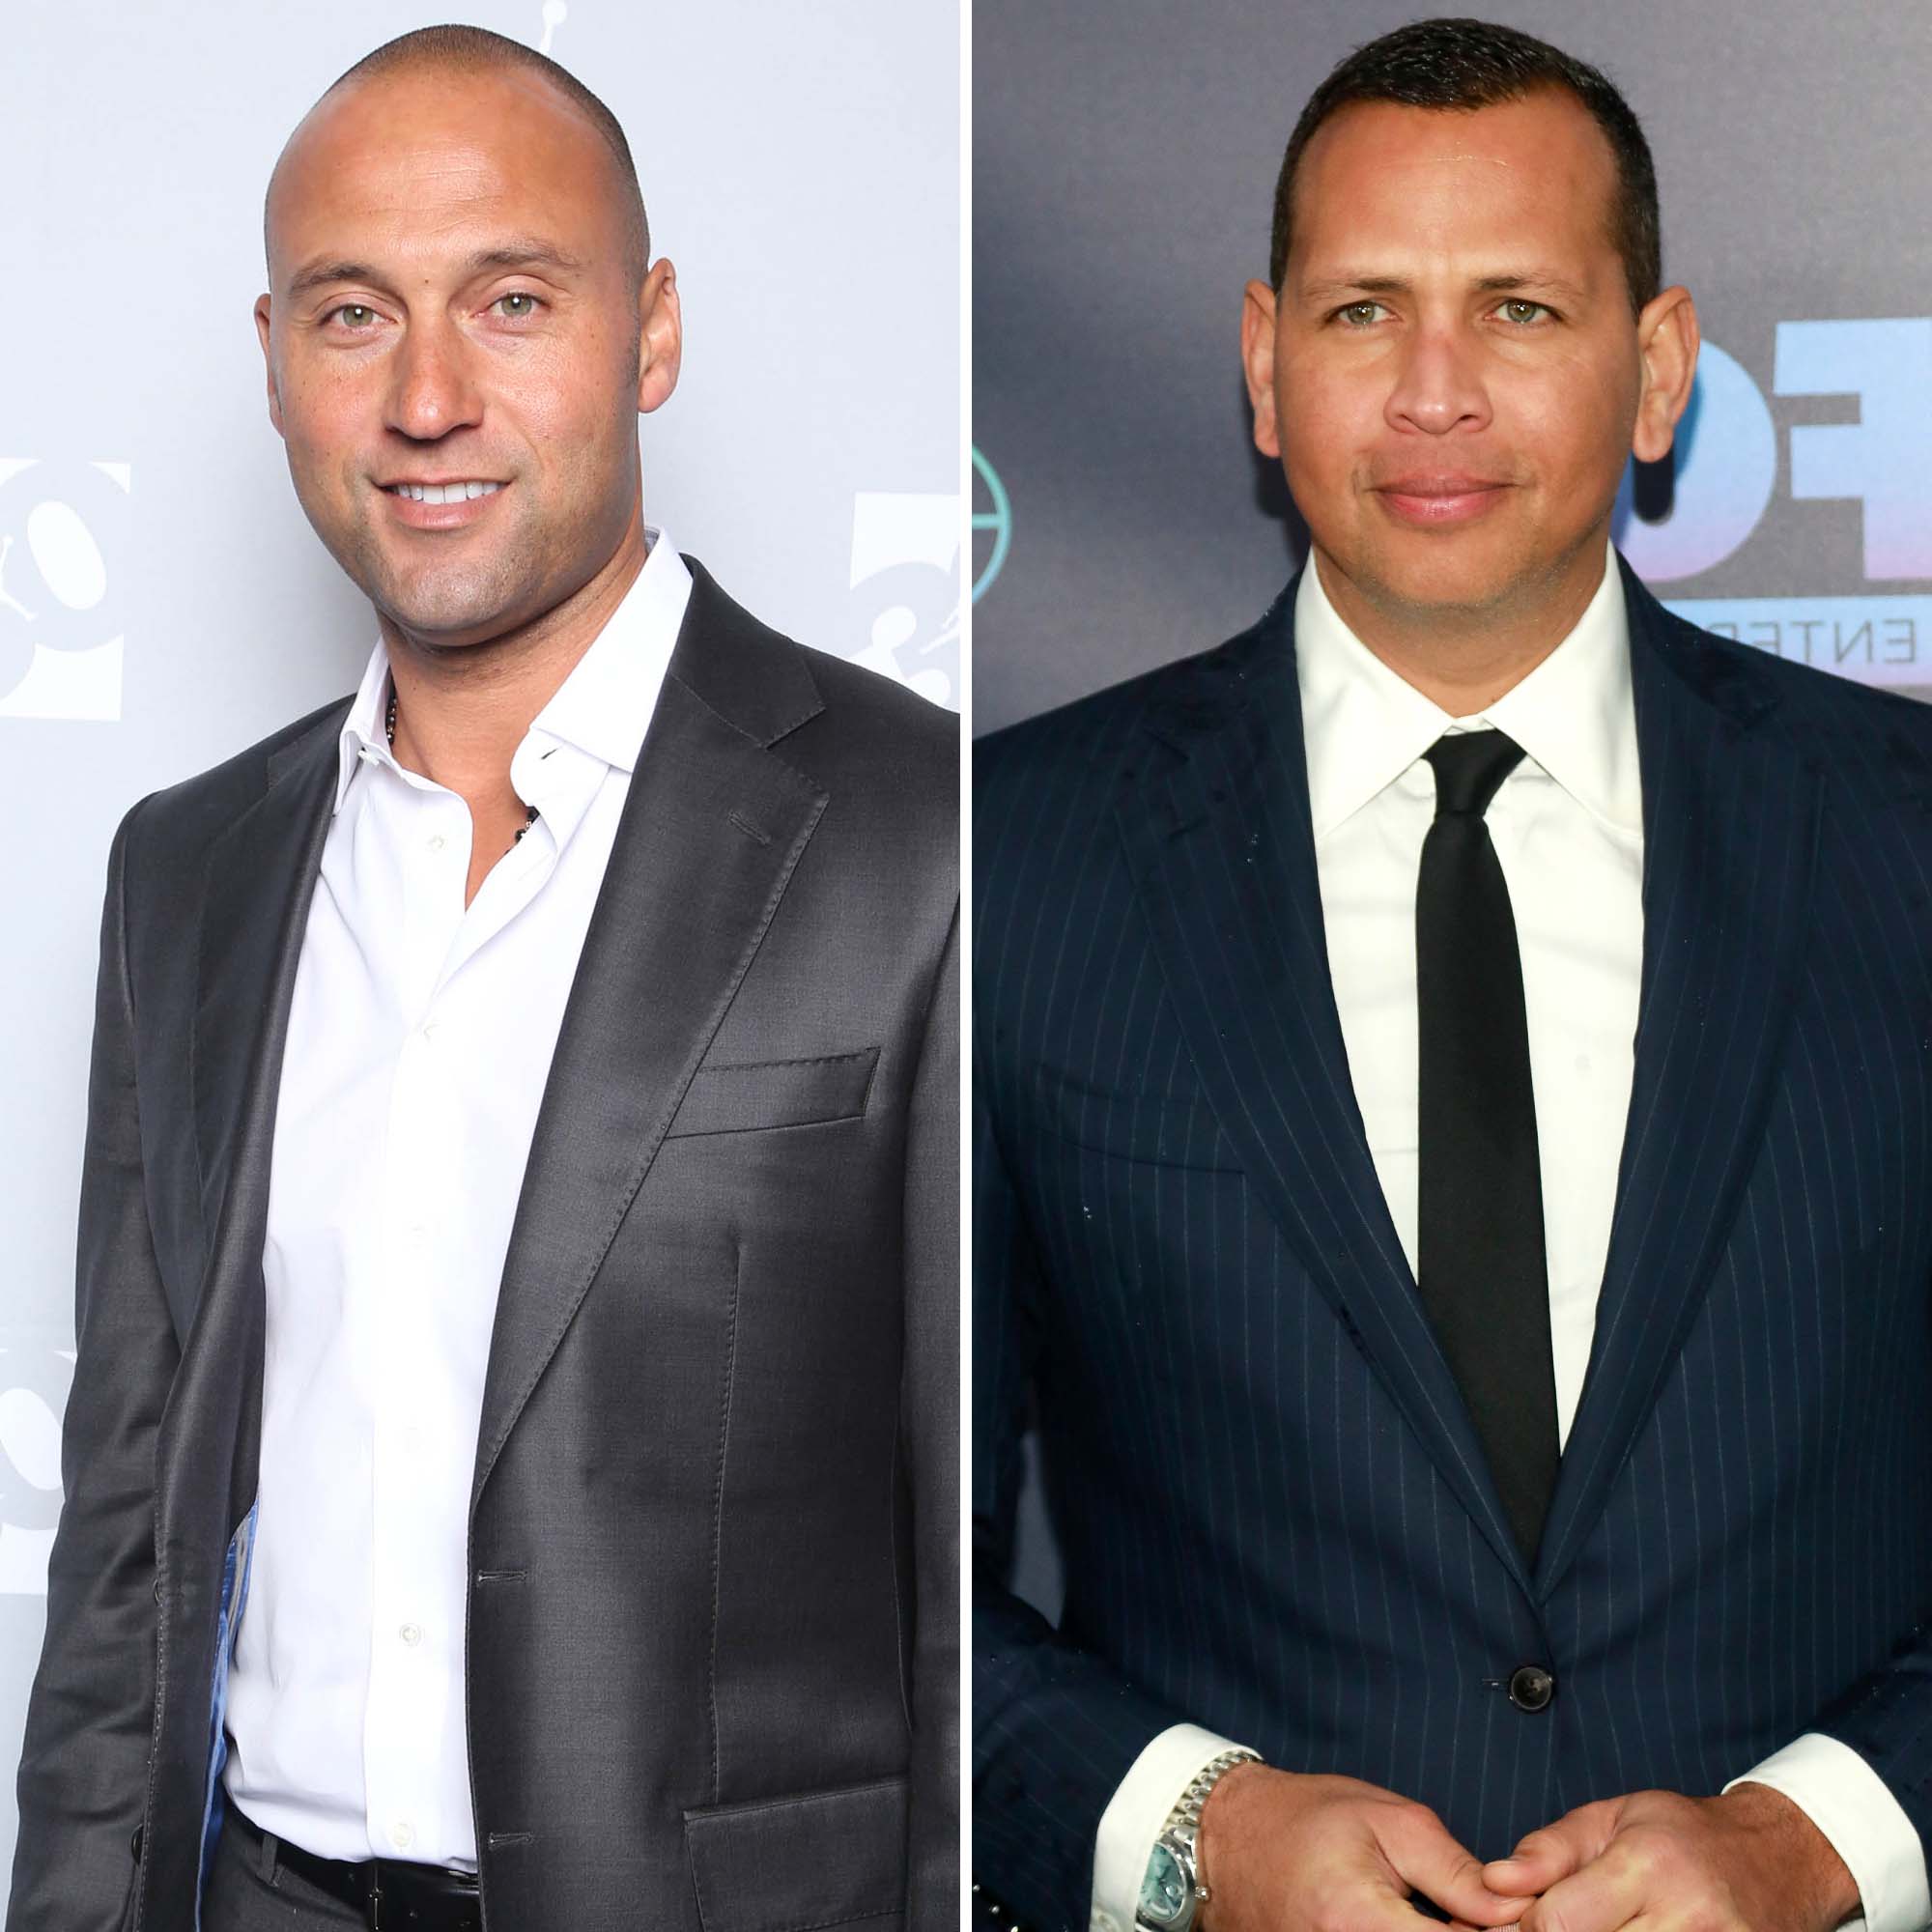 Inside Derek Jeter and Alex Rodriguez's complex relationship from feuds to  friendship and World Series glory